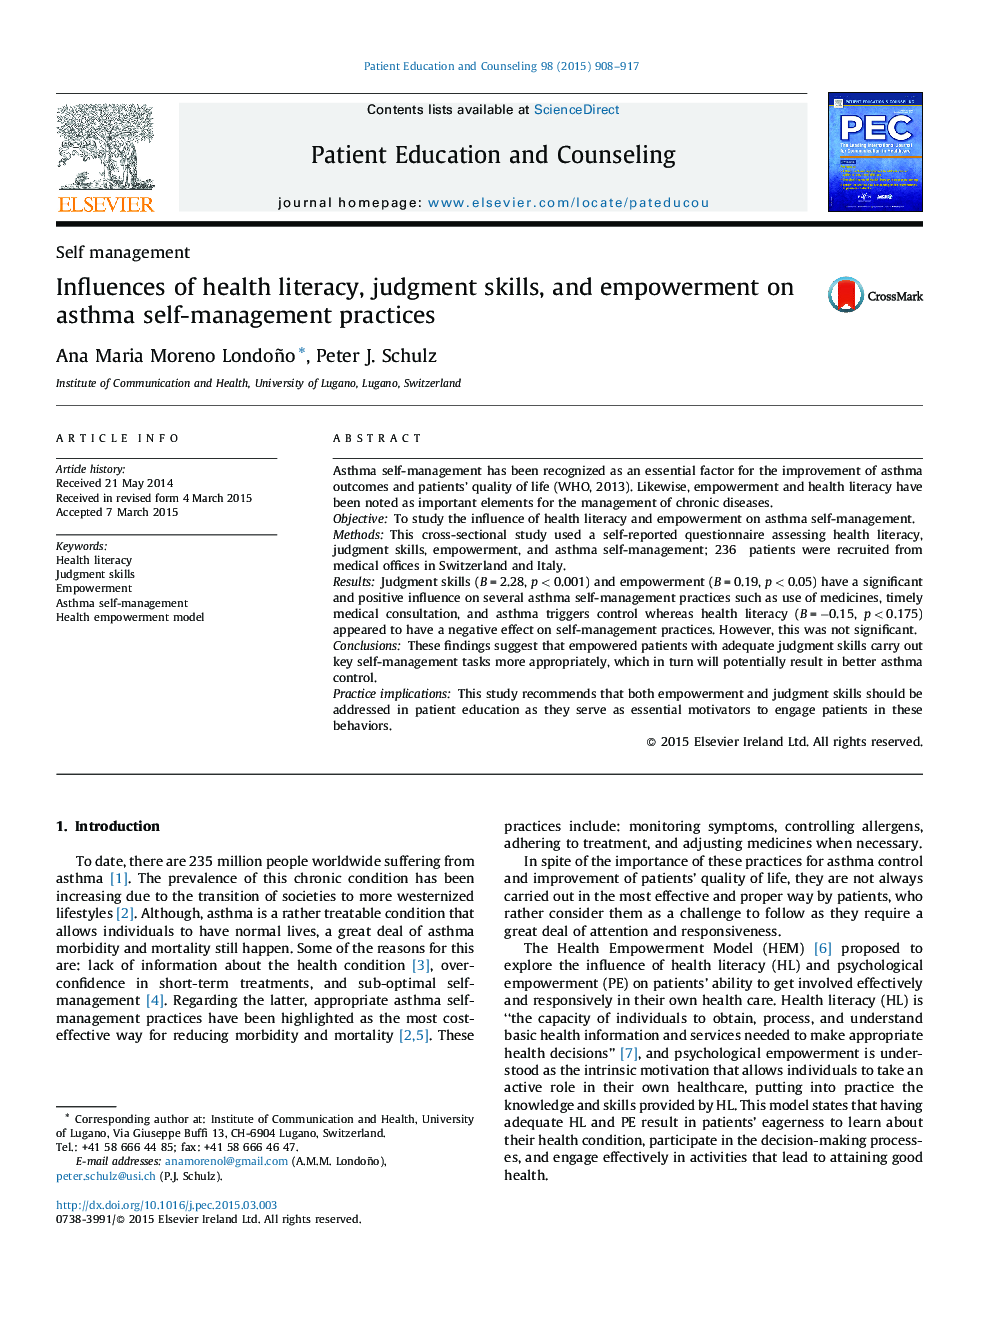 Influences of health literacy, judgment skills, and empowerment on asthma self-management practices